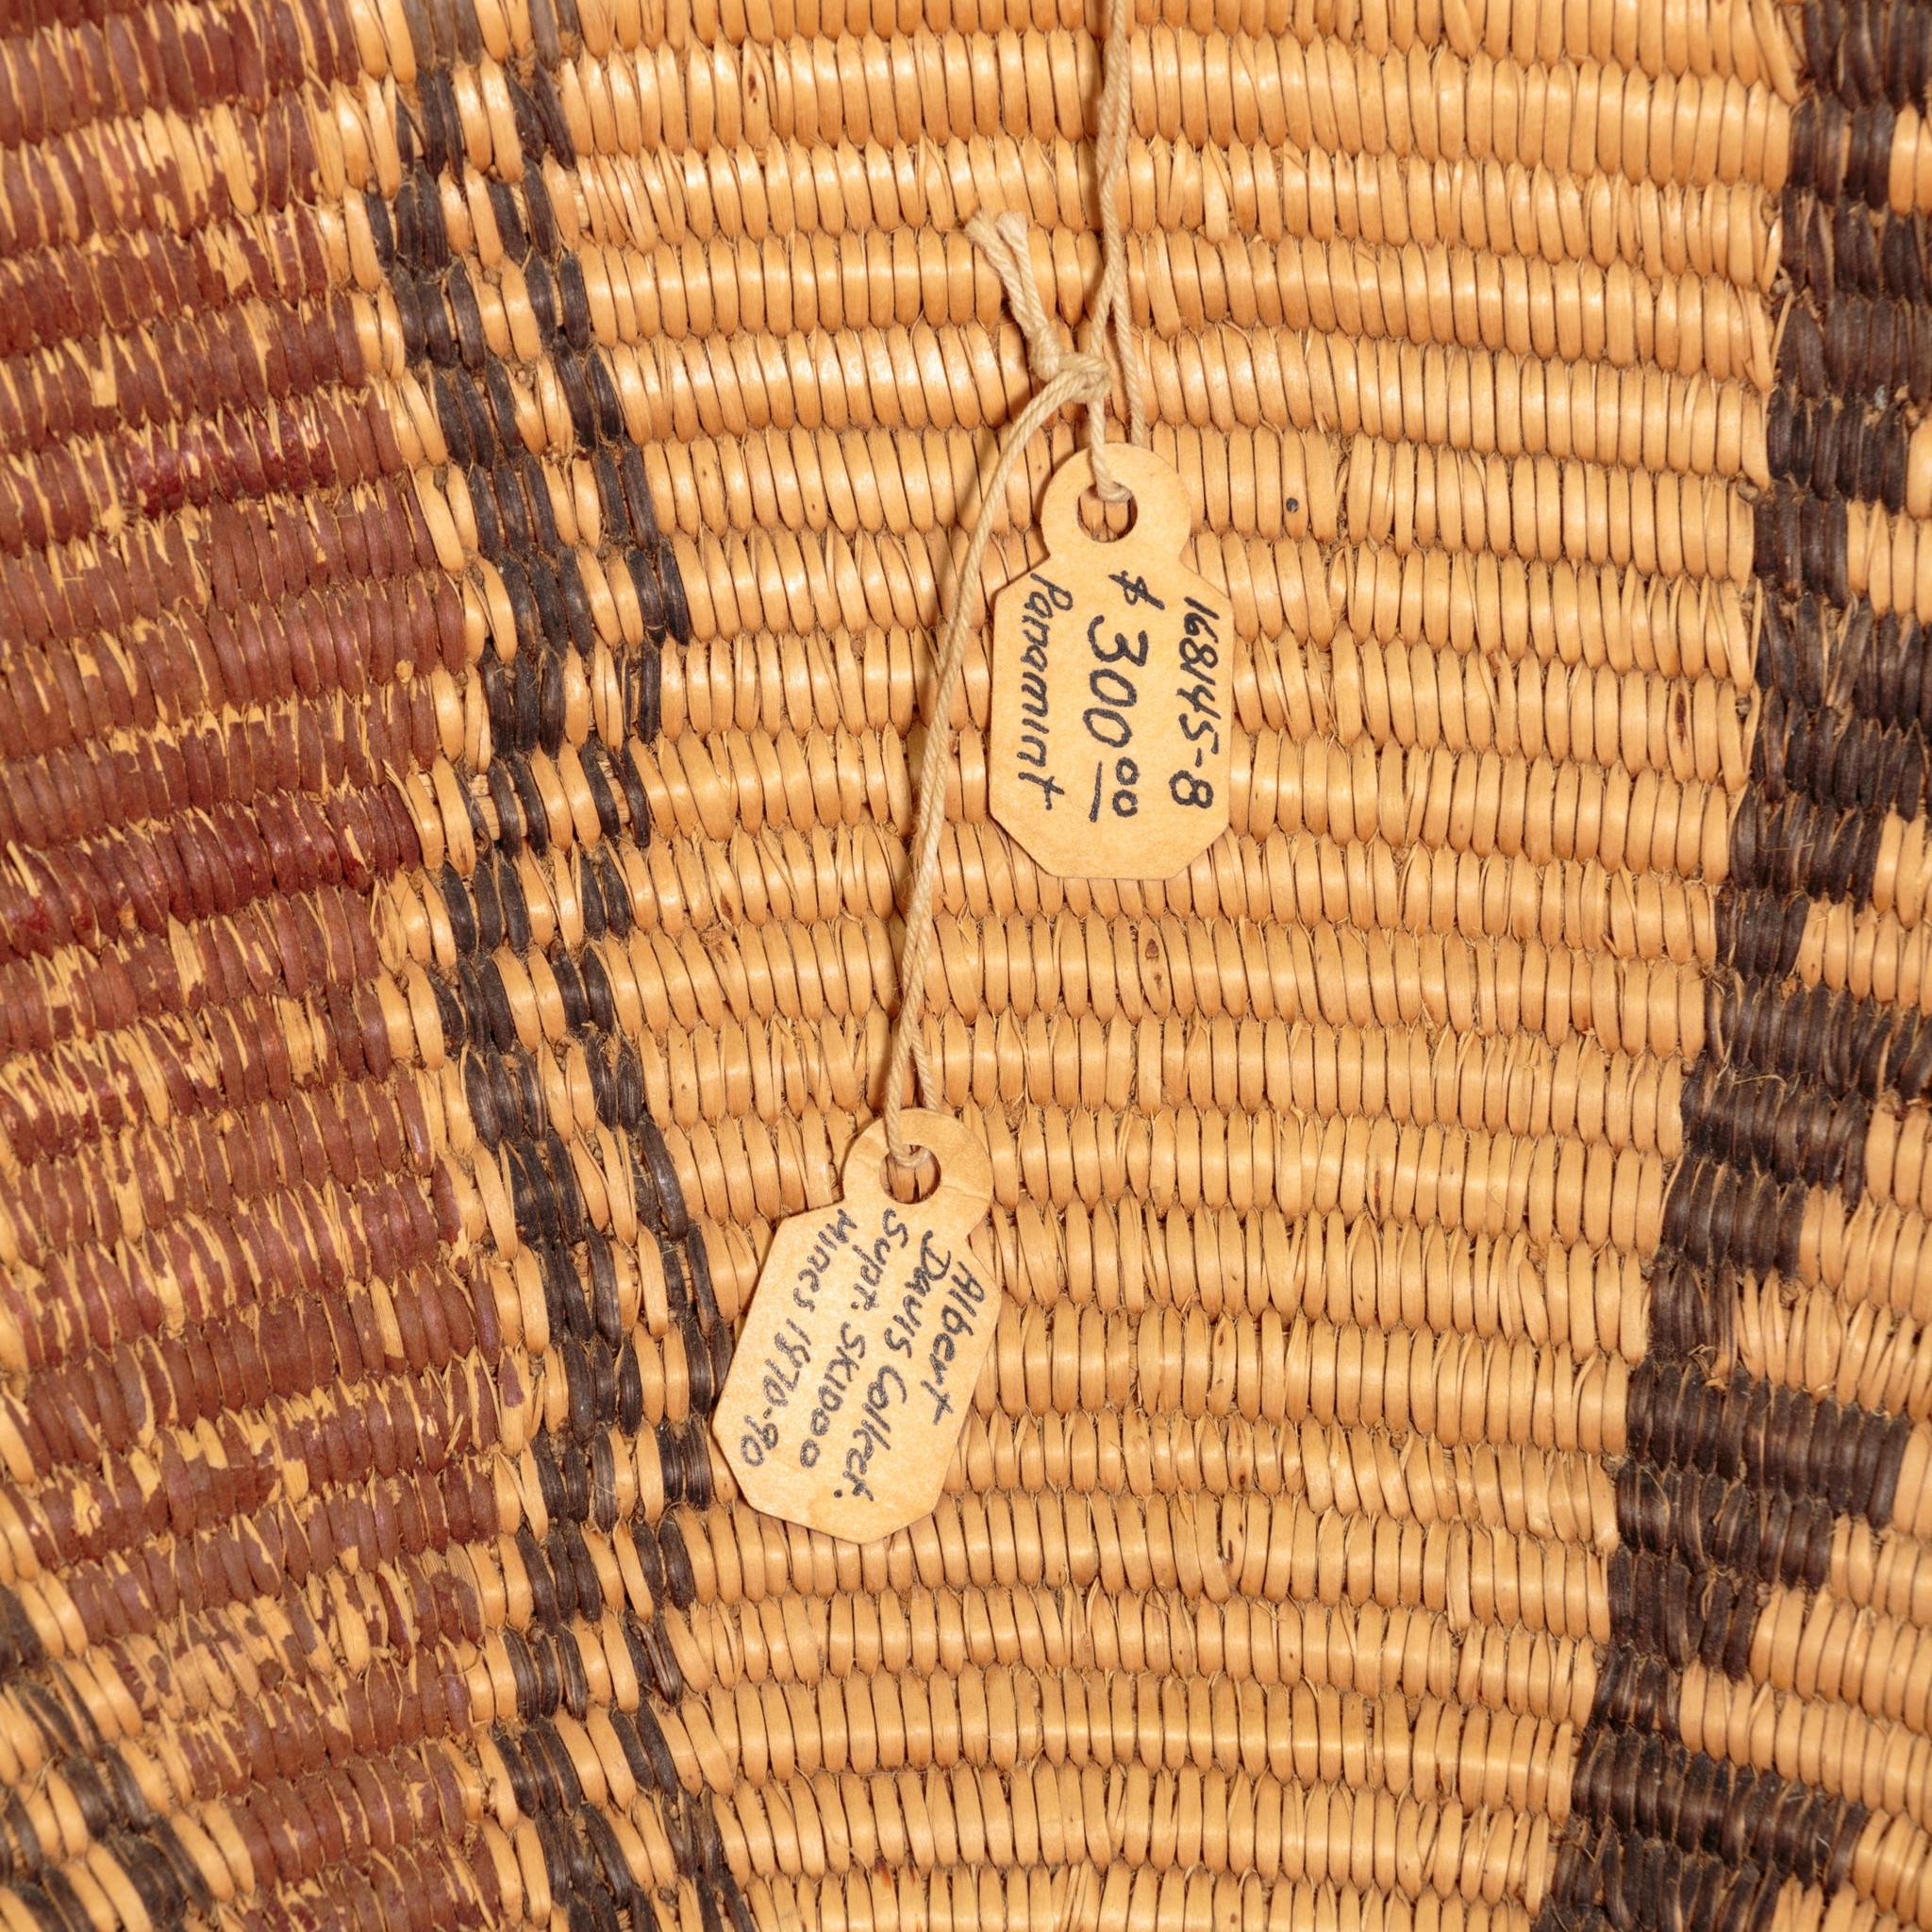 Finely woven polychrome Panamint. With original collection tags. Albert Davis collection, Supt. Skidoo Mines, 1870-1890.

Period: Last quarter of the 19th century.

Origin: Nevada

Size: 6